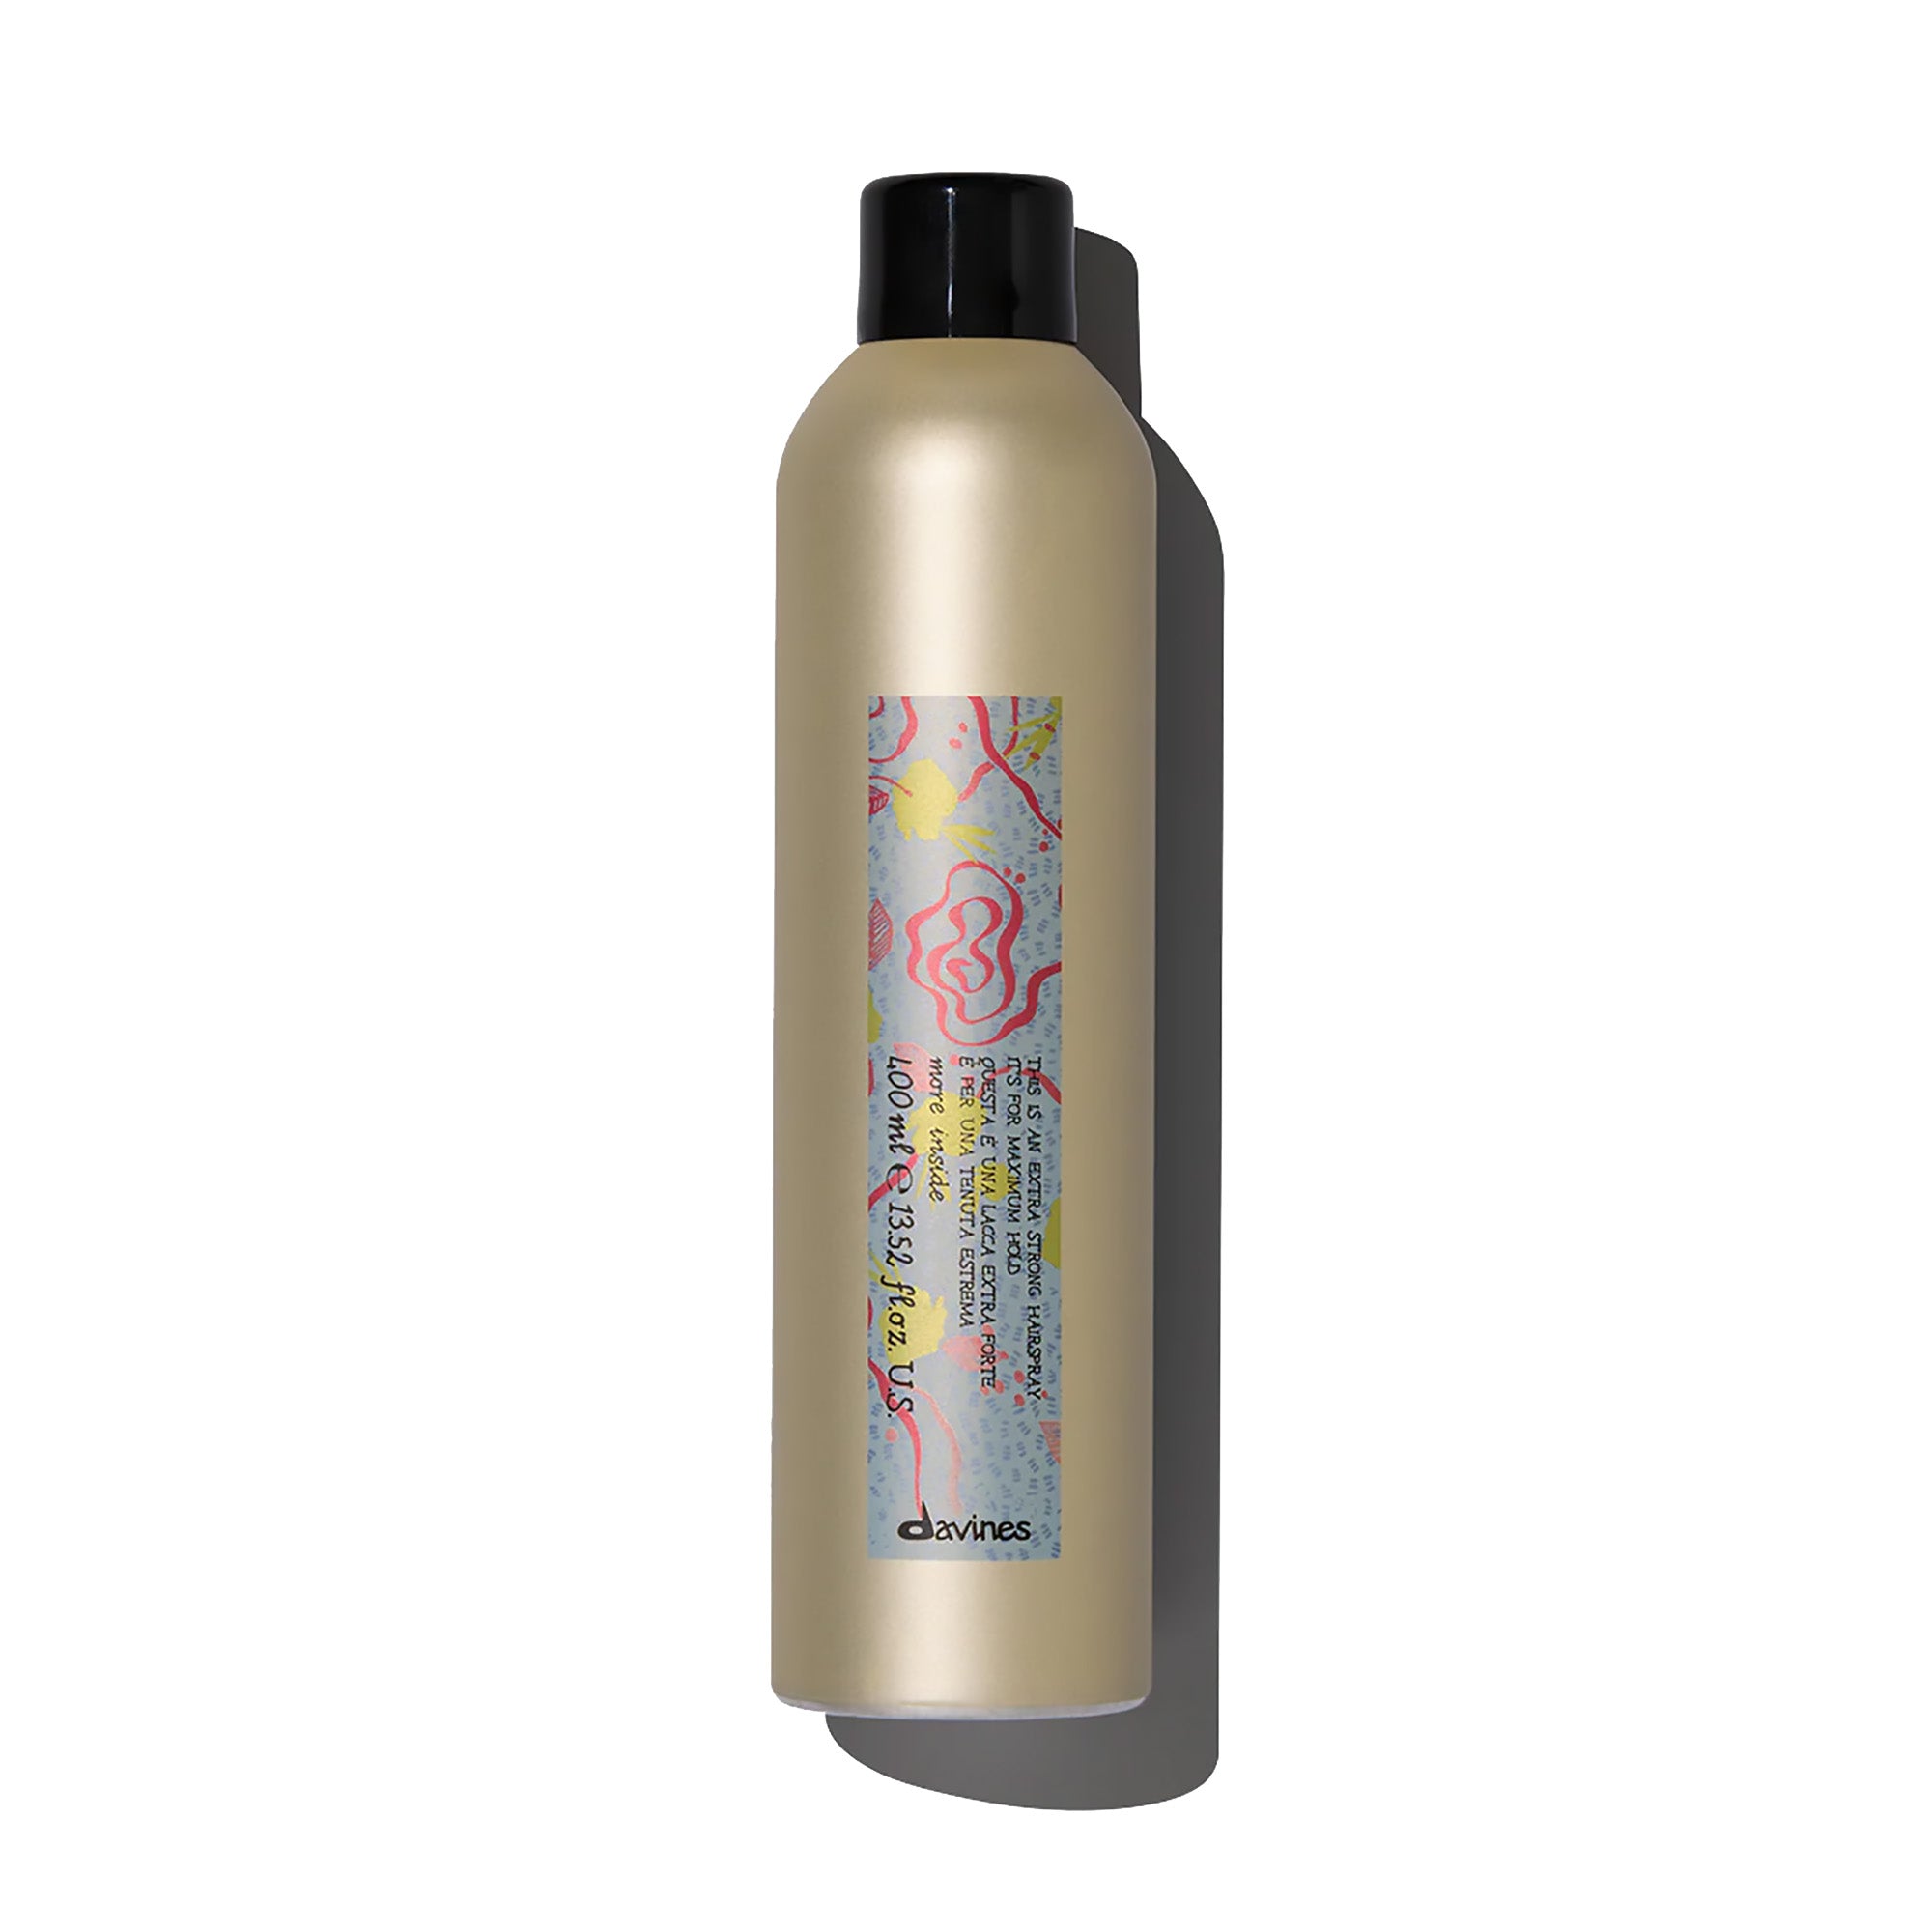 Davines This is an Extra Strong Hairspray / 13OZ